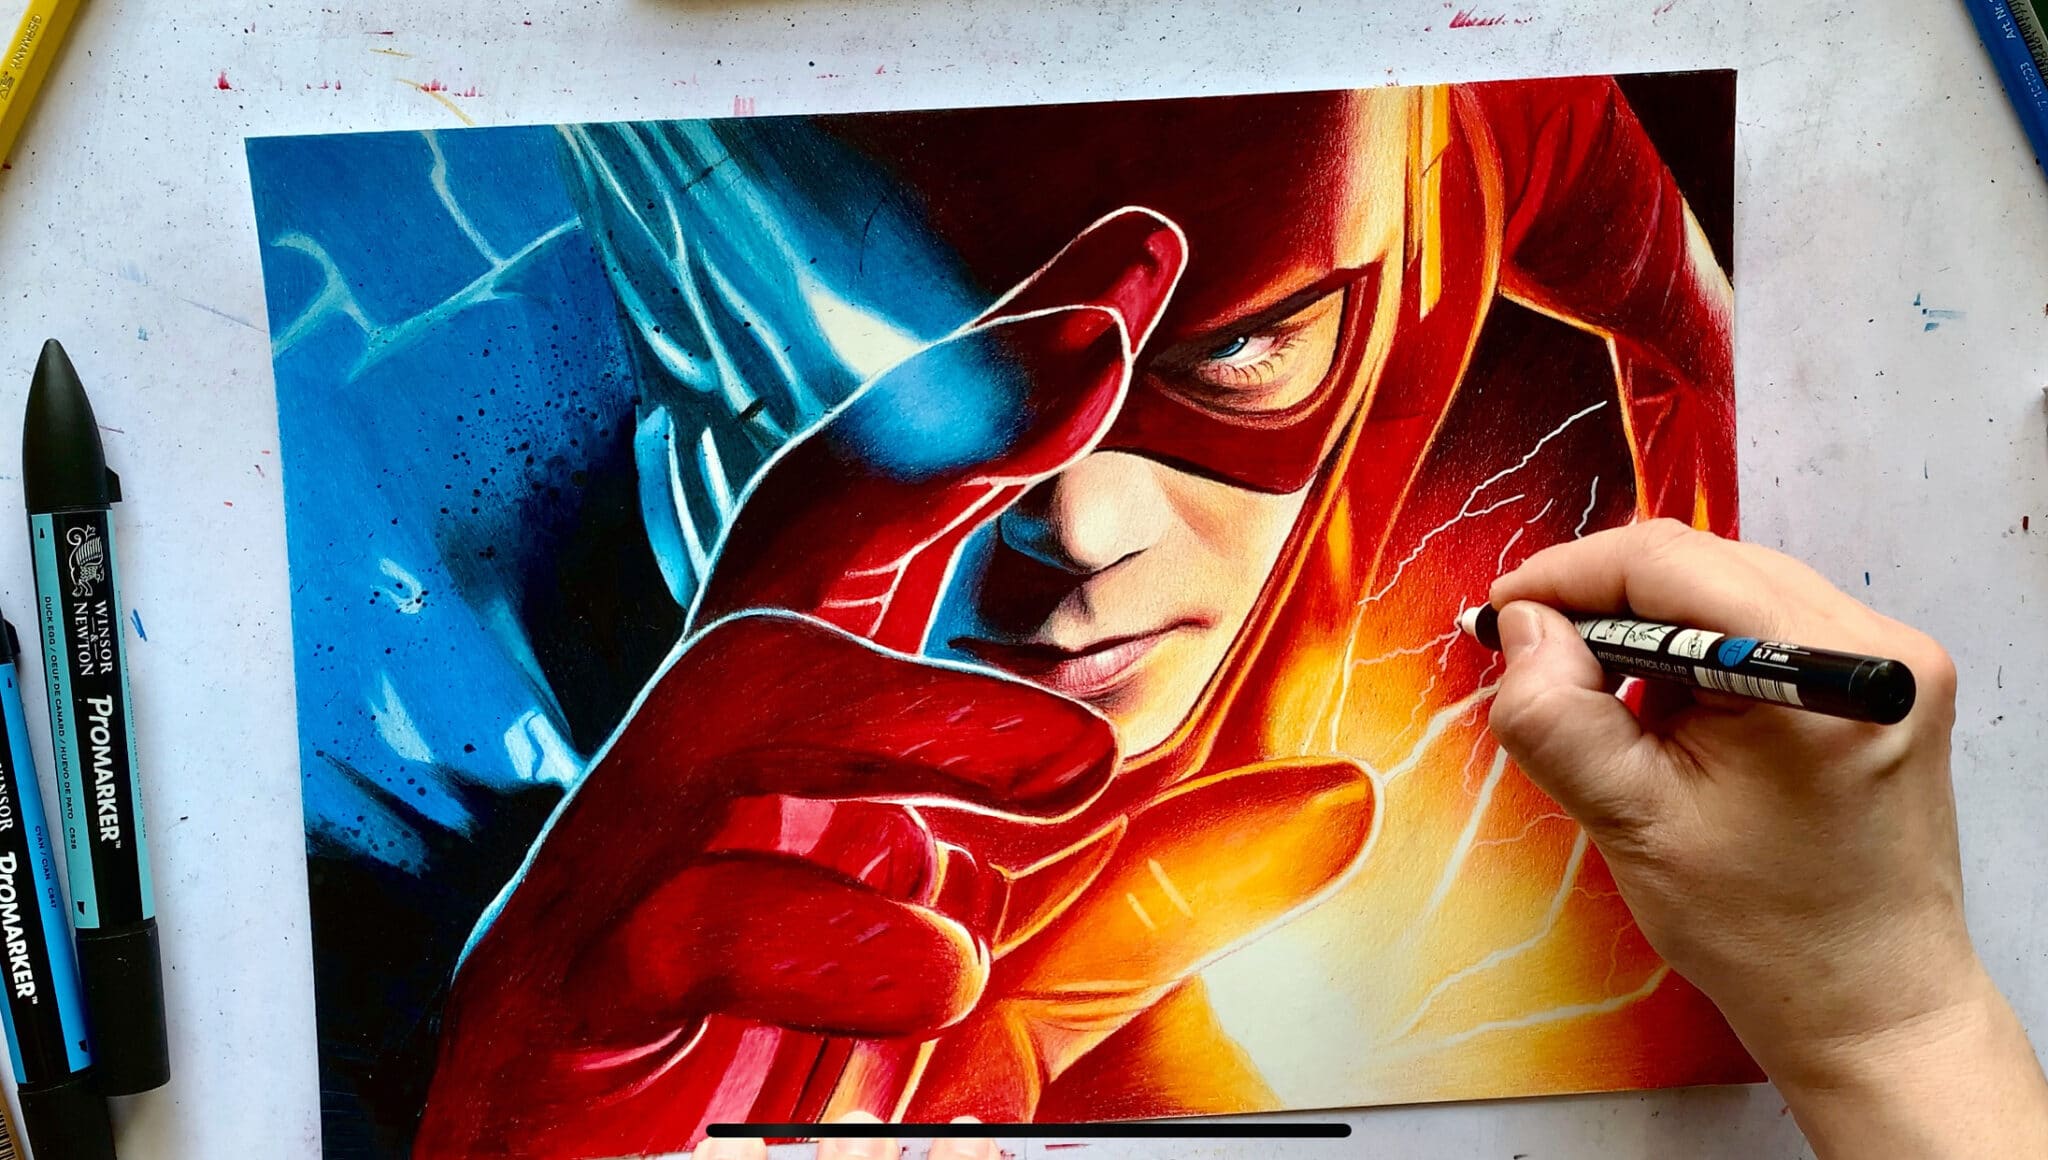  Drawing the Flash motion blur effect - Ioanna Ladopoulou Art Design